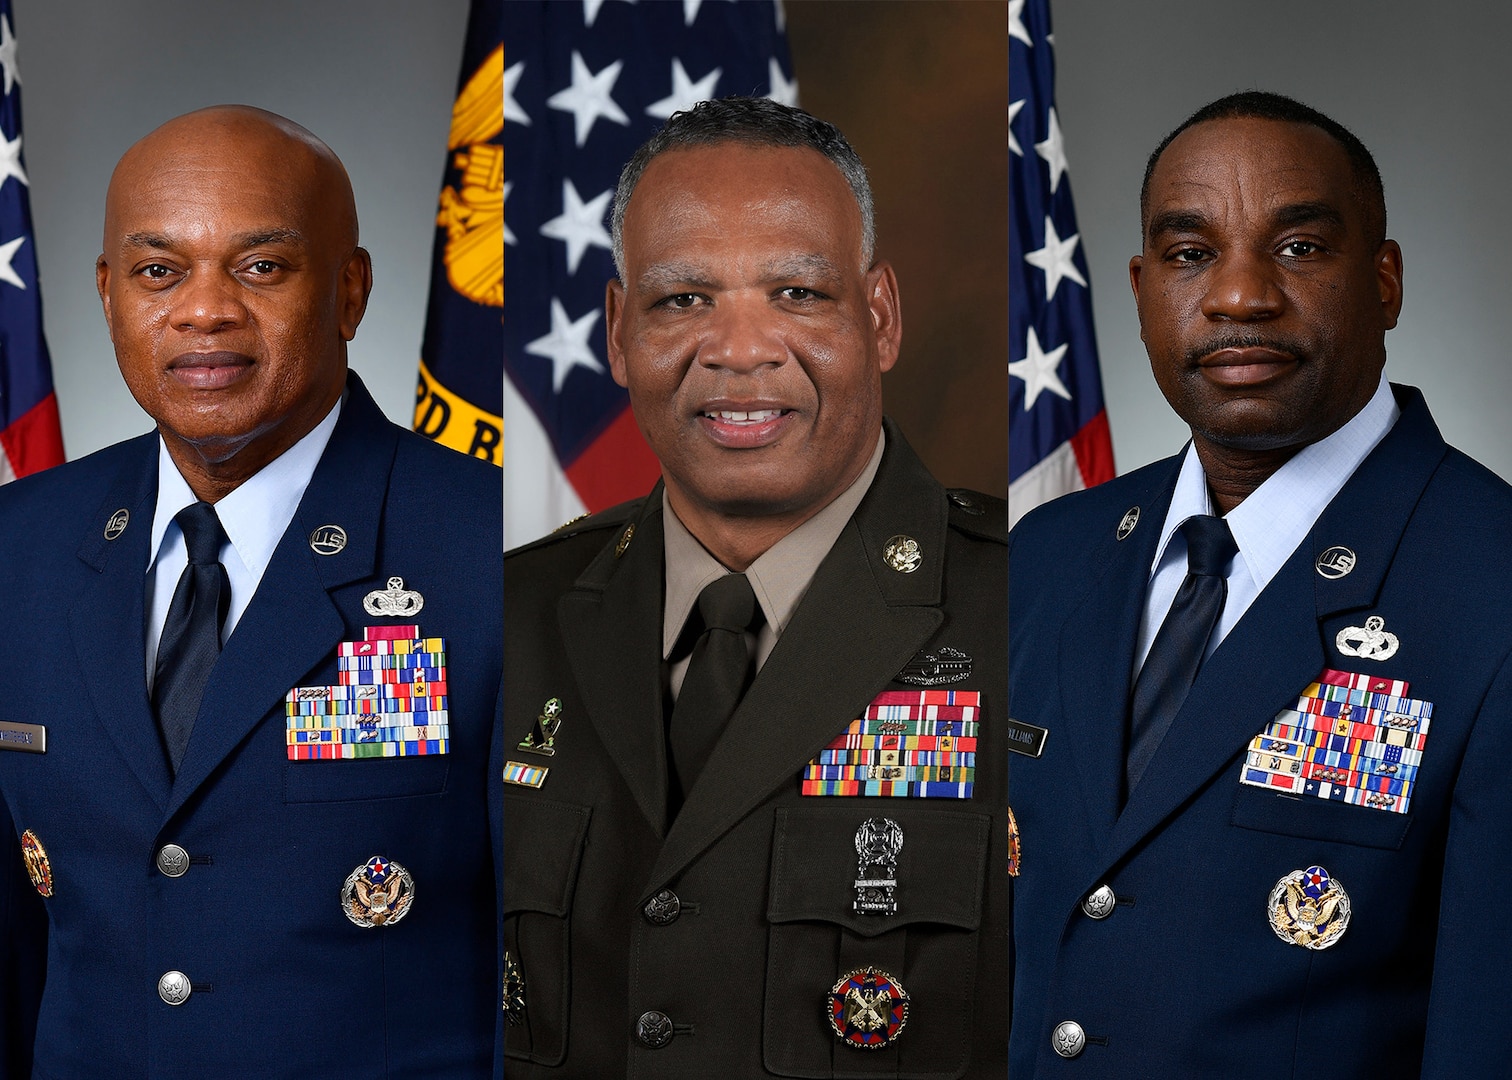 Graphic of the three senior enlisted leaders of the National Guard, from left, Senior Enlisted Advisor to the Chief of the National Guard Bureau Tony Whitehead, Command Sgt. Major of the Army National Guard John Sampa, and Command Chief Master Sgt. of the Air National Guard Maurice Williams.